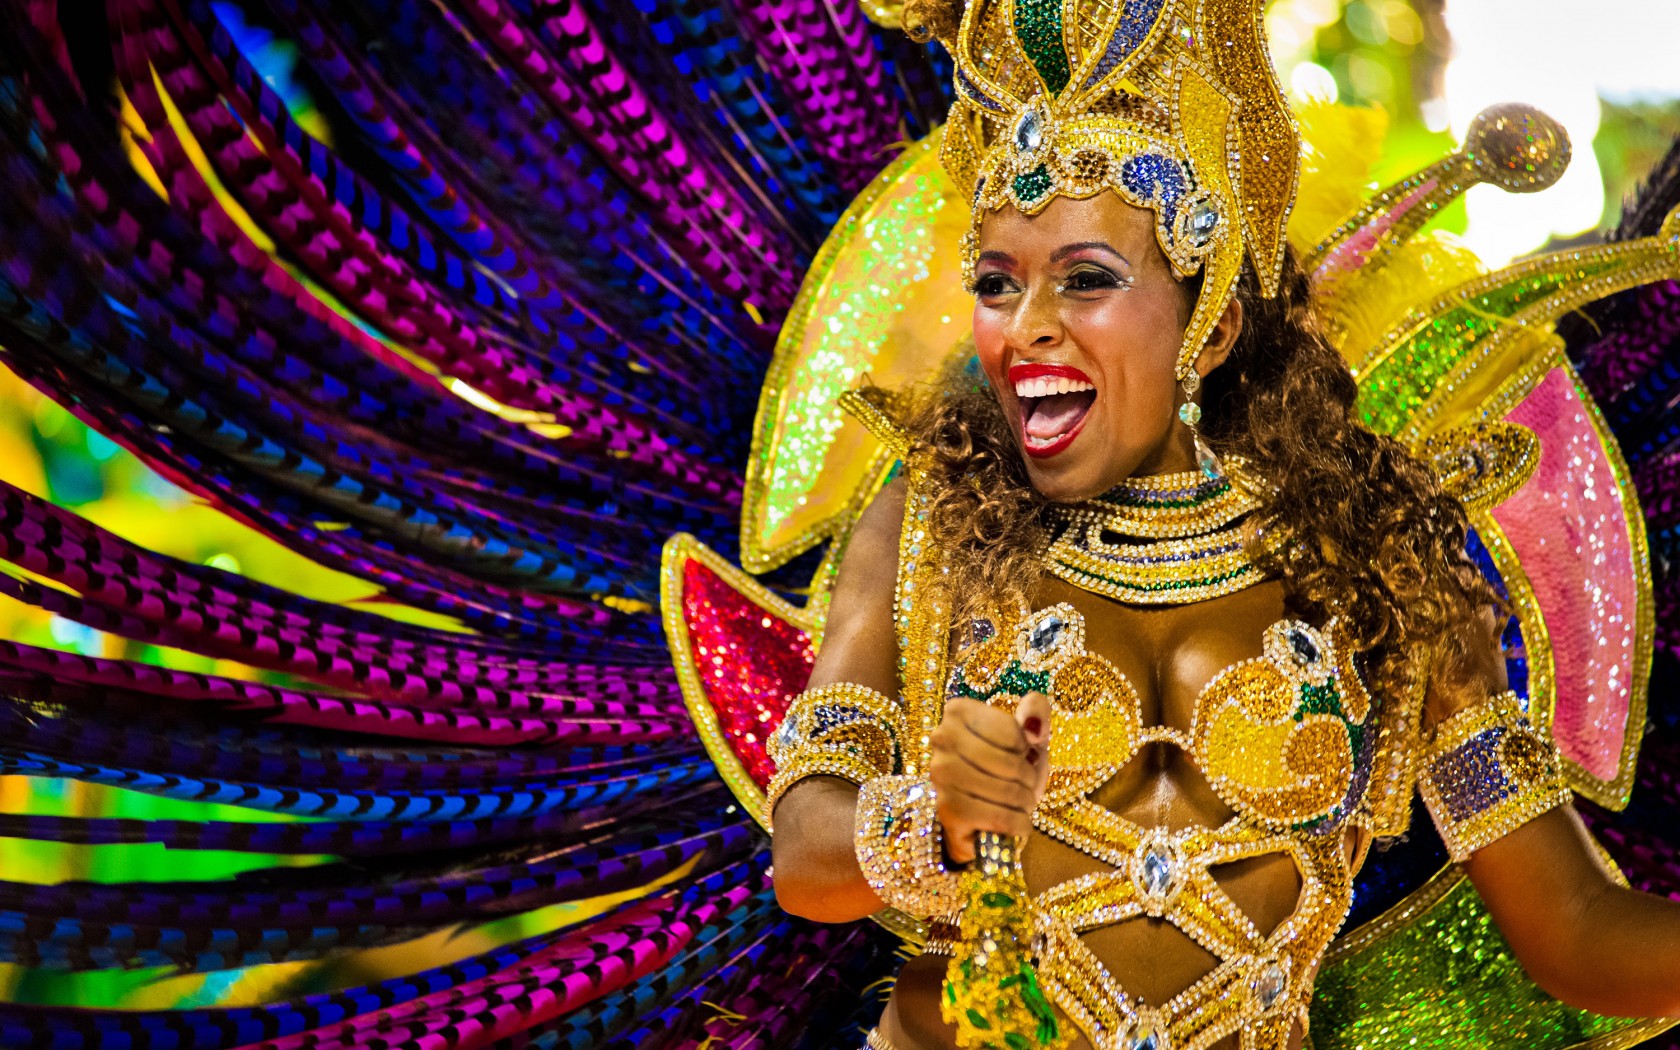 The Carnival In Rio Wallpaper High Quality